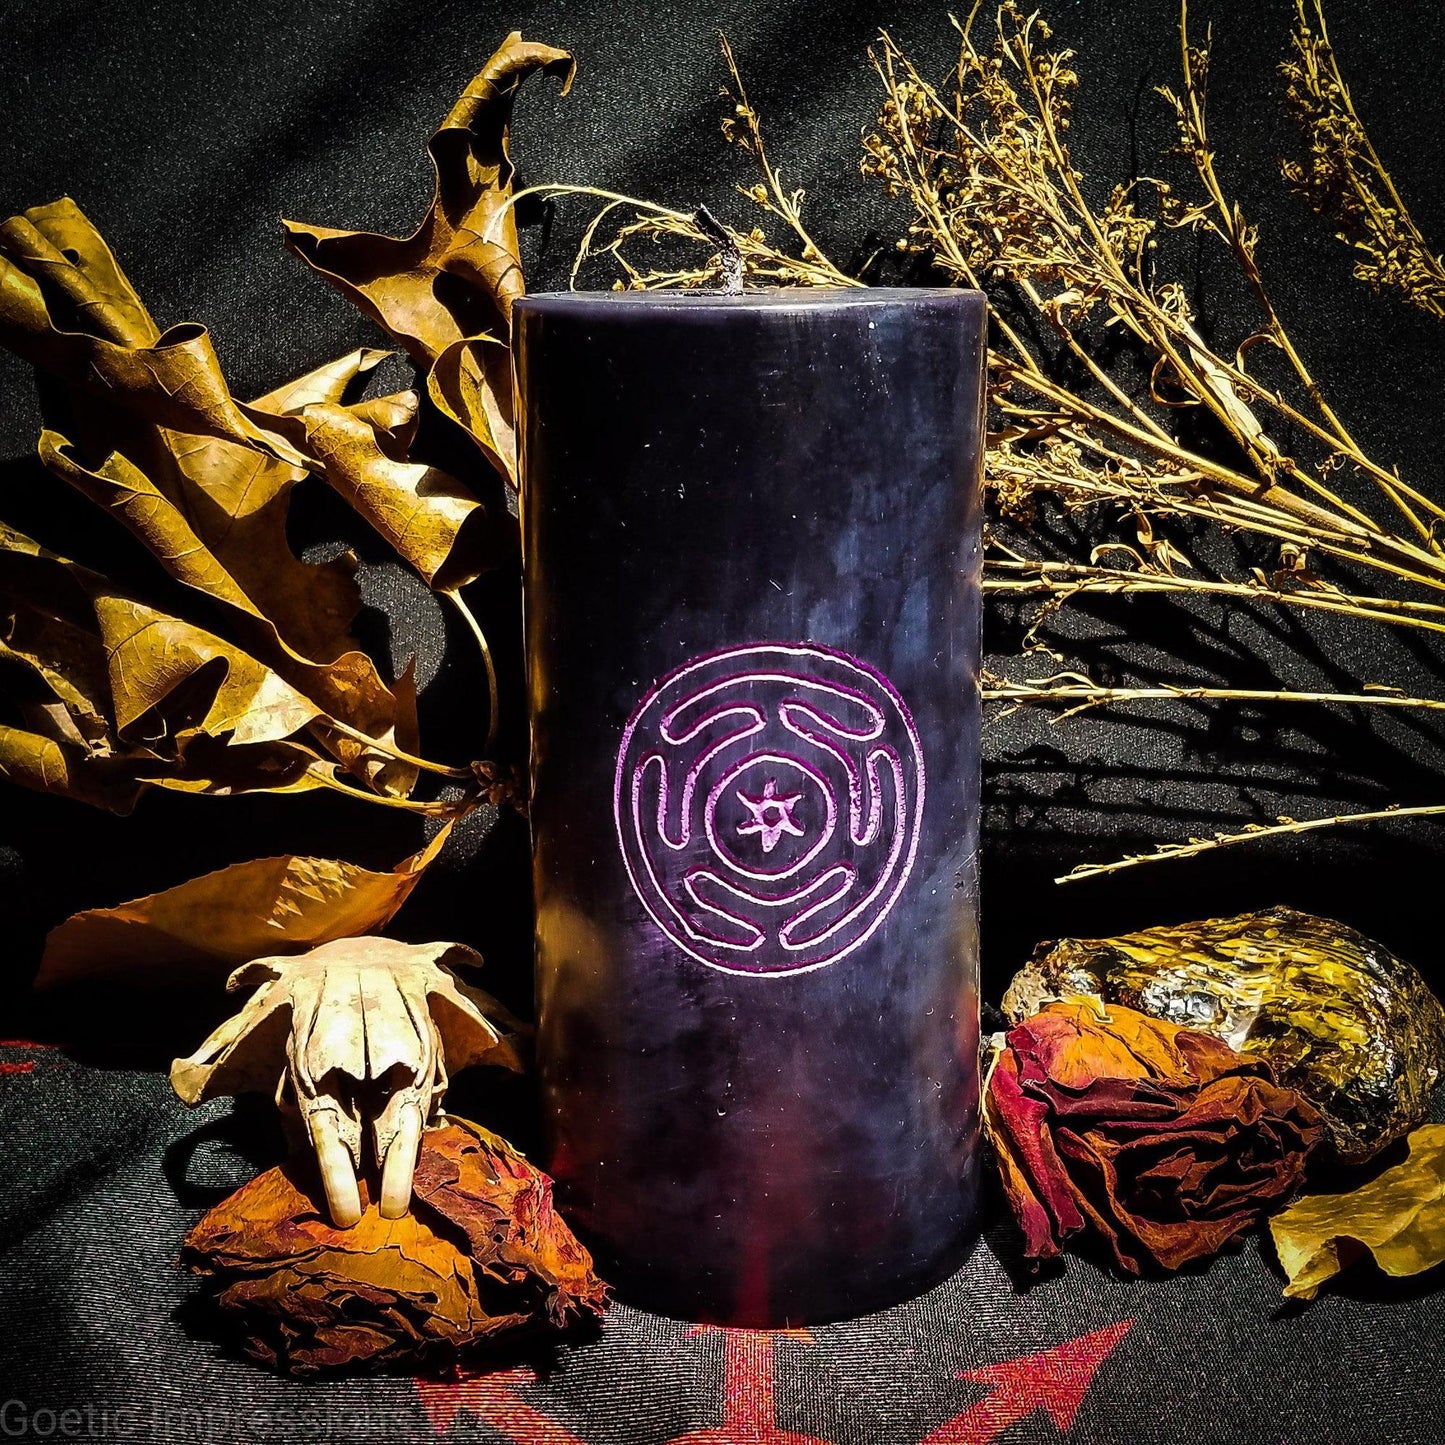 Wheel of Hecate Stropholos Pillar candle